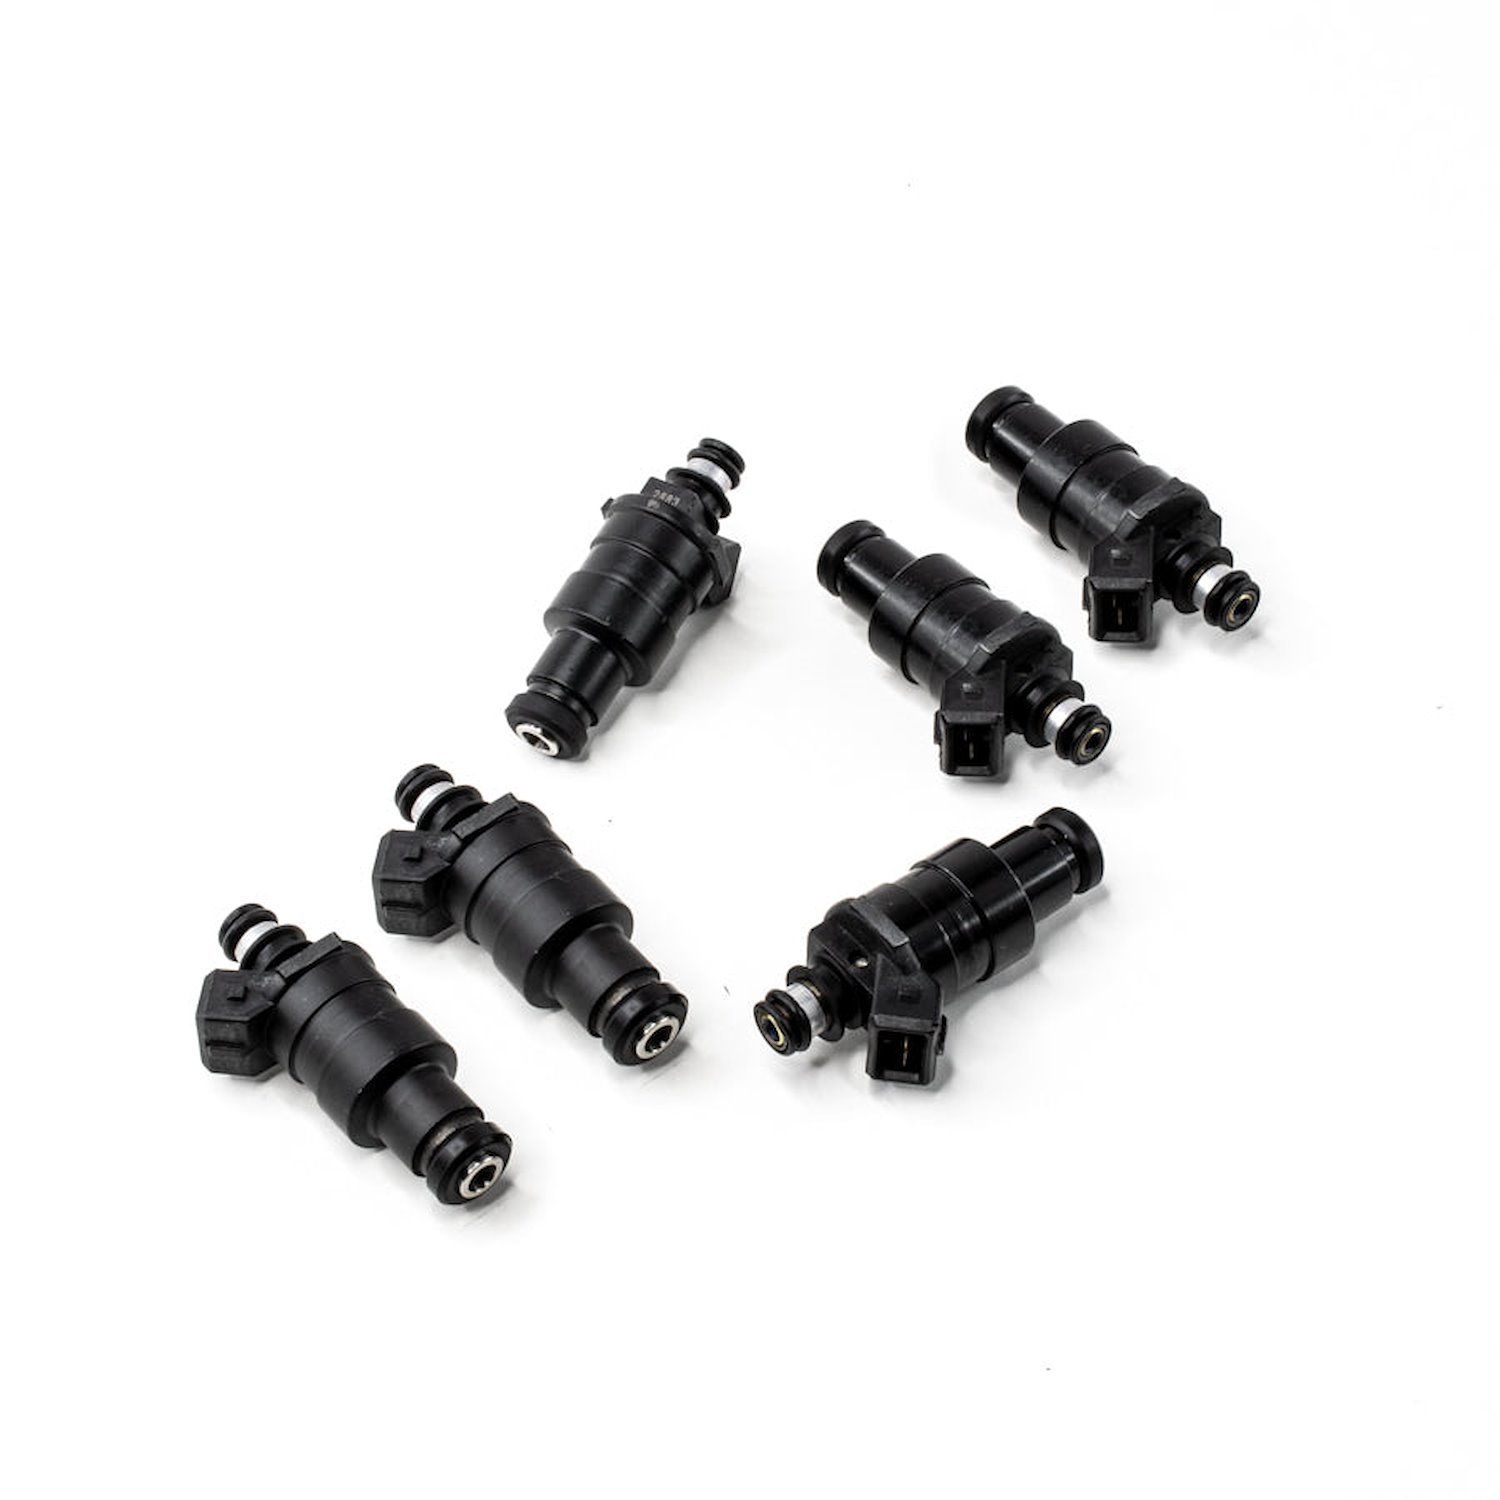 42M0205506  550cc Low Impedance Injectors for Mitsubishi 3000GT 90-01 and Dodge Stealth 91-96.